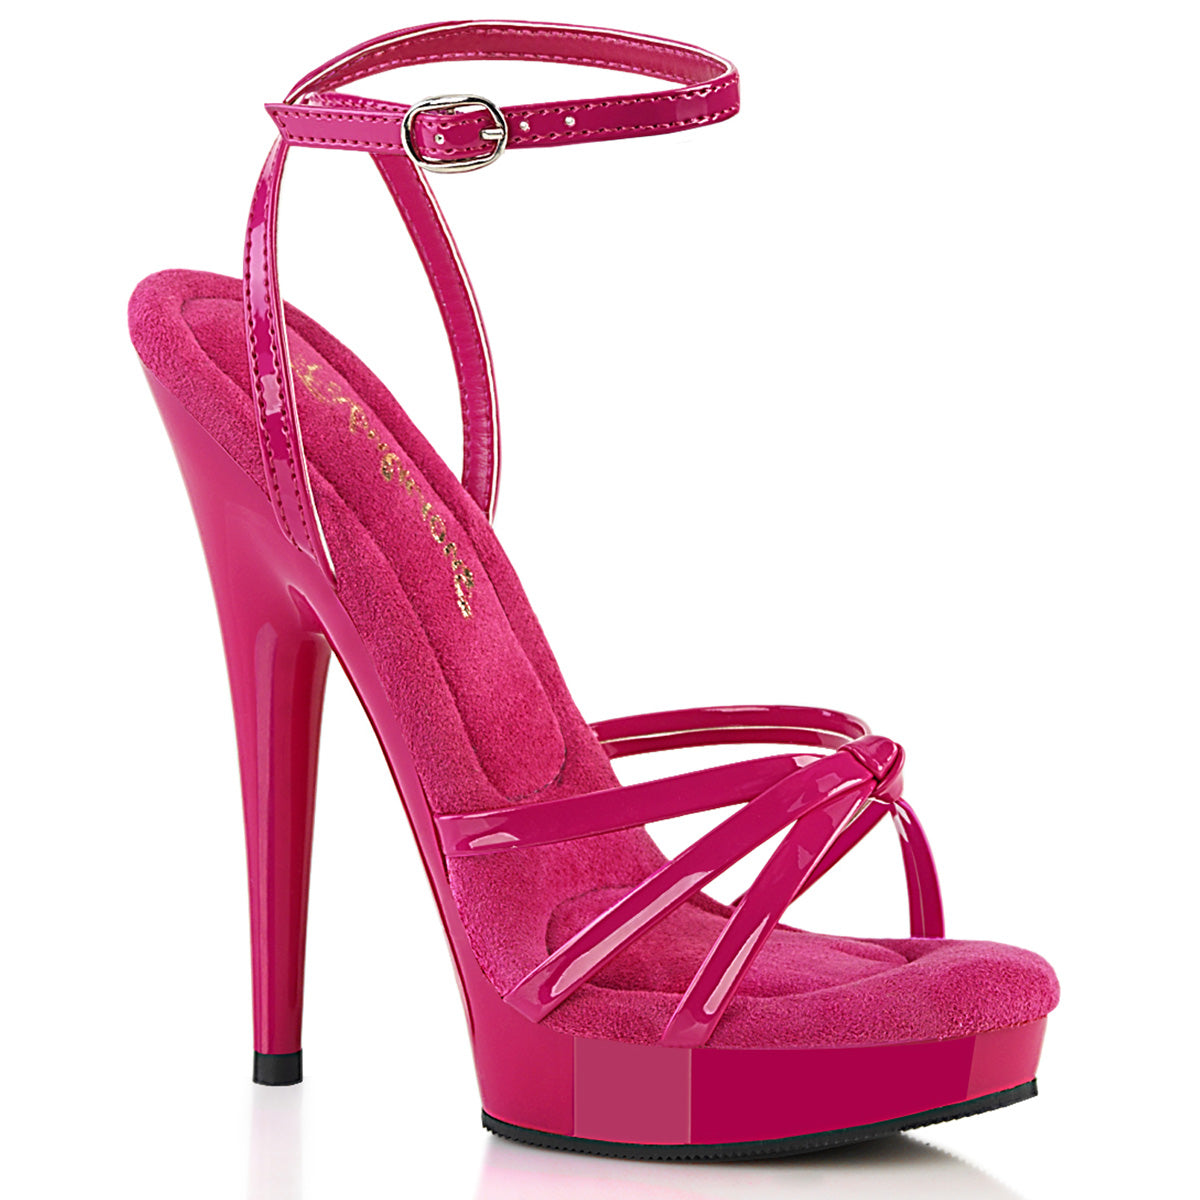 Wrap Around Knotted Strap Pink Sandal